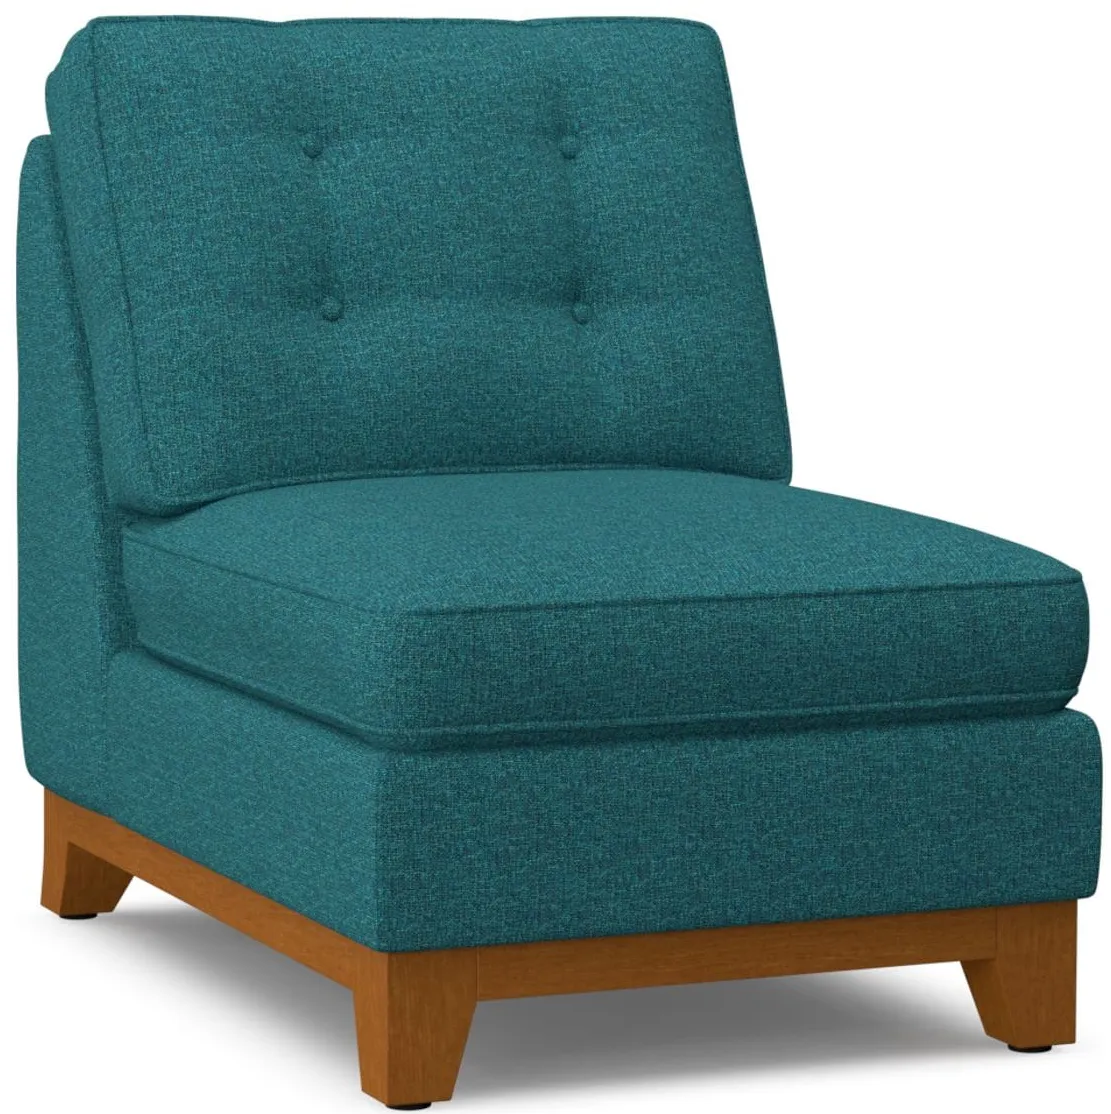 Brentwood Armless Chair